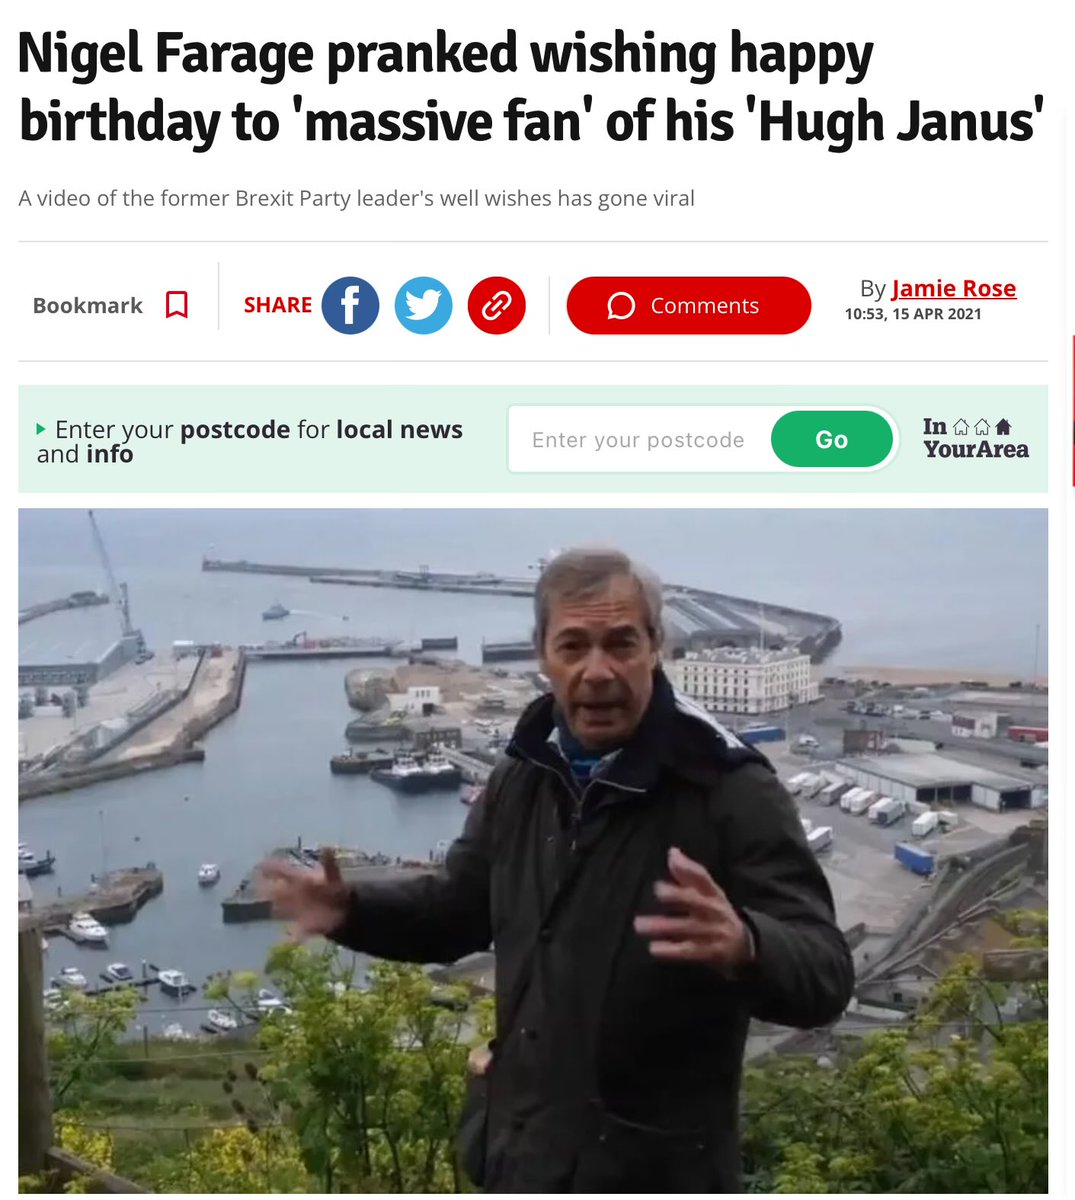 @dave43law @Nigel_Farage Imagine being so gullible you fall for something #LiarJohnson promises. 
But then nige does seem to have a track record for gullibility, doesn’t he?